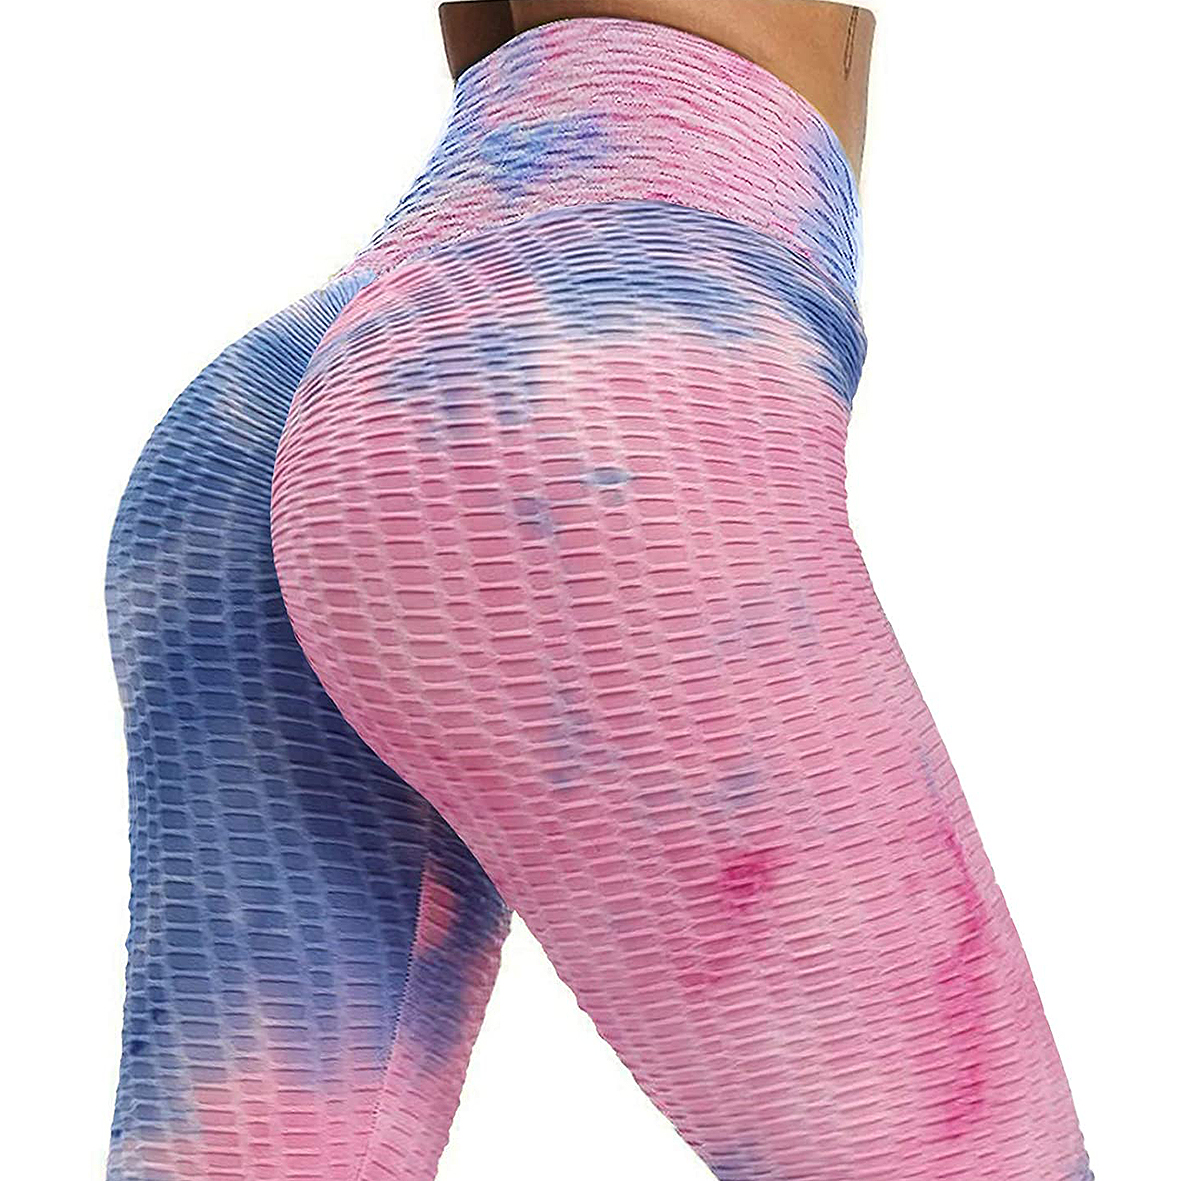 Buy SEASUM Women High Waisted Yoga Pants Workout Butt Lifting Scrunch Booty  Leggings Tummy Control Anti Cellulite Textured Tights M at Amazon.in